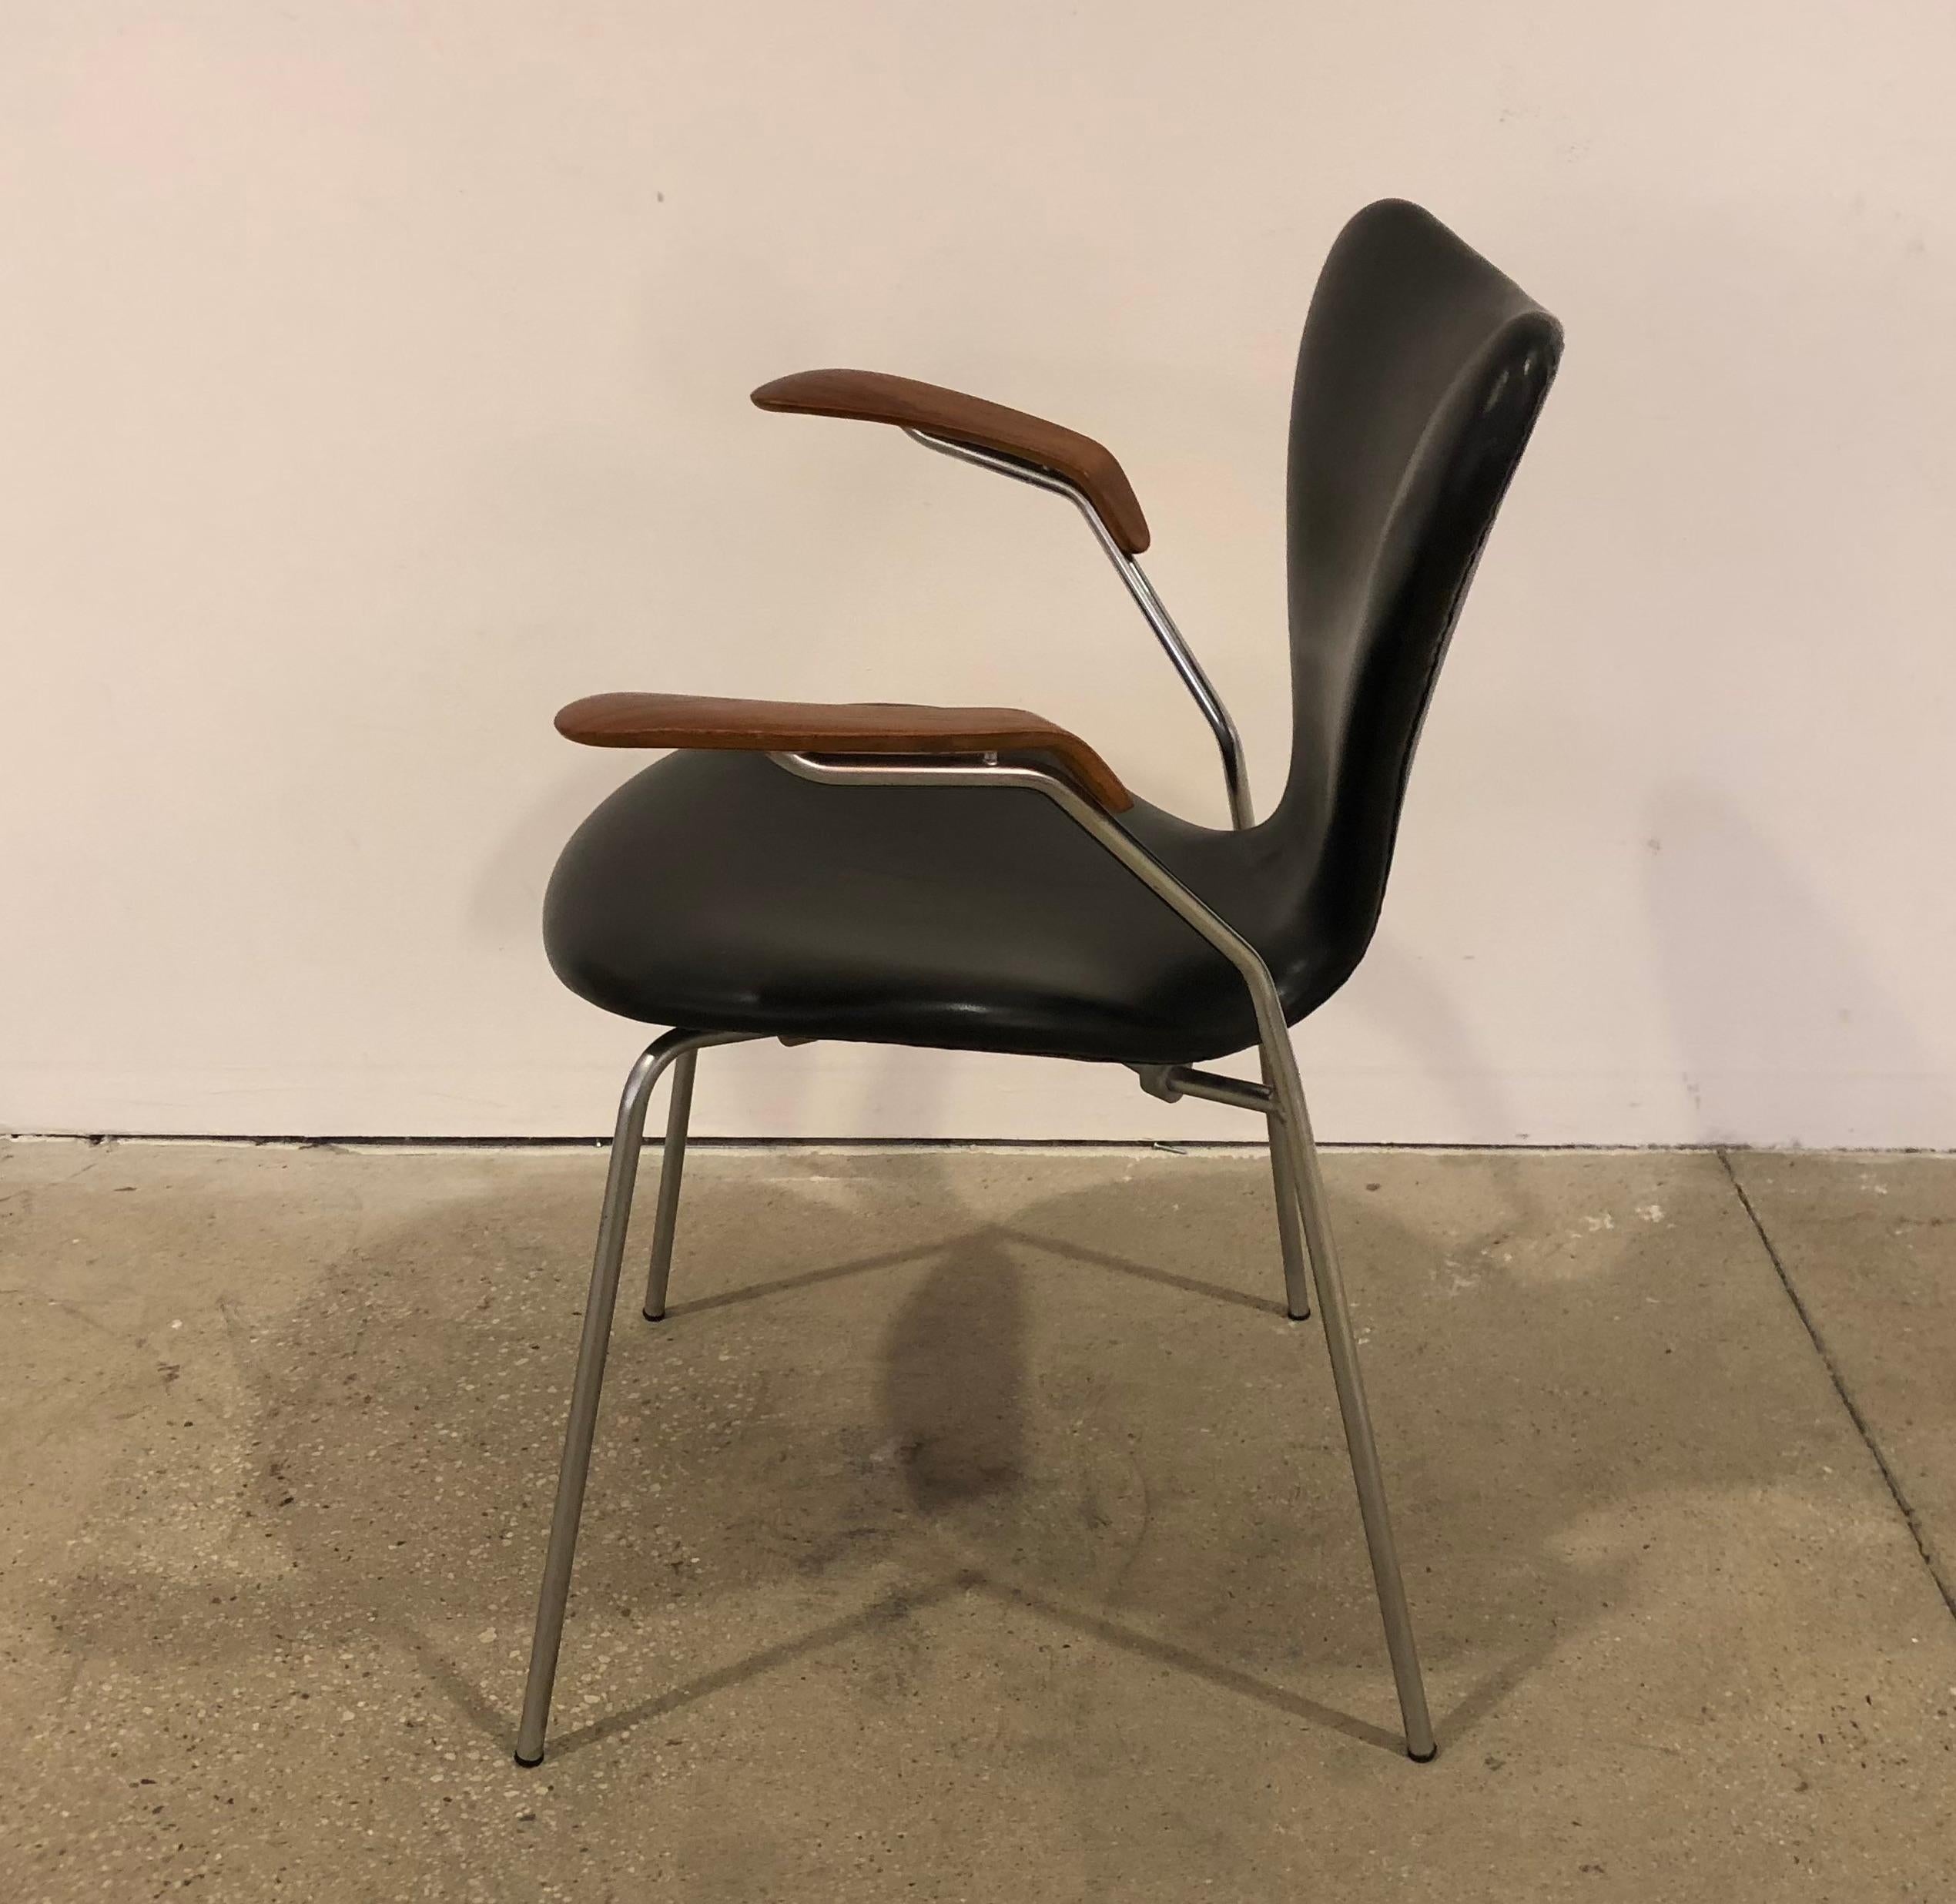 Single armchair designed by Arne Jacobsen. Created by Fritz Hansen. Leather upholstery. Chair is in our NYC showroom in the NY Design Center at 200 Lexington Ave.